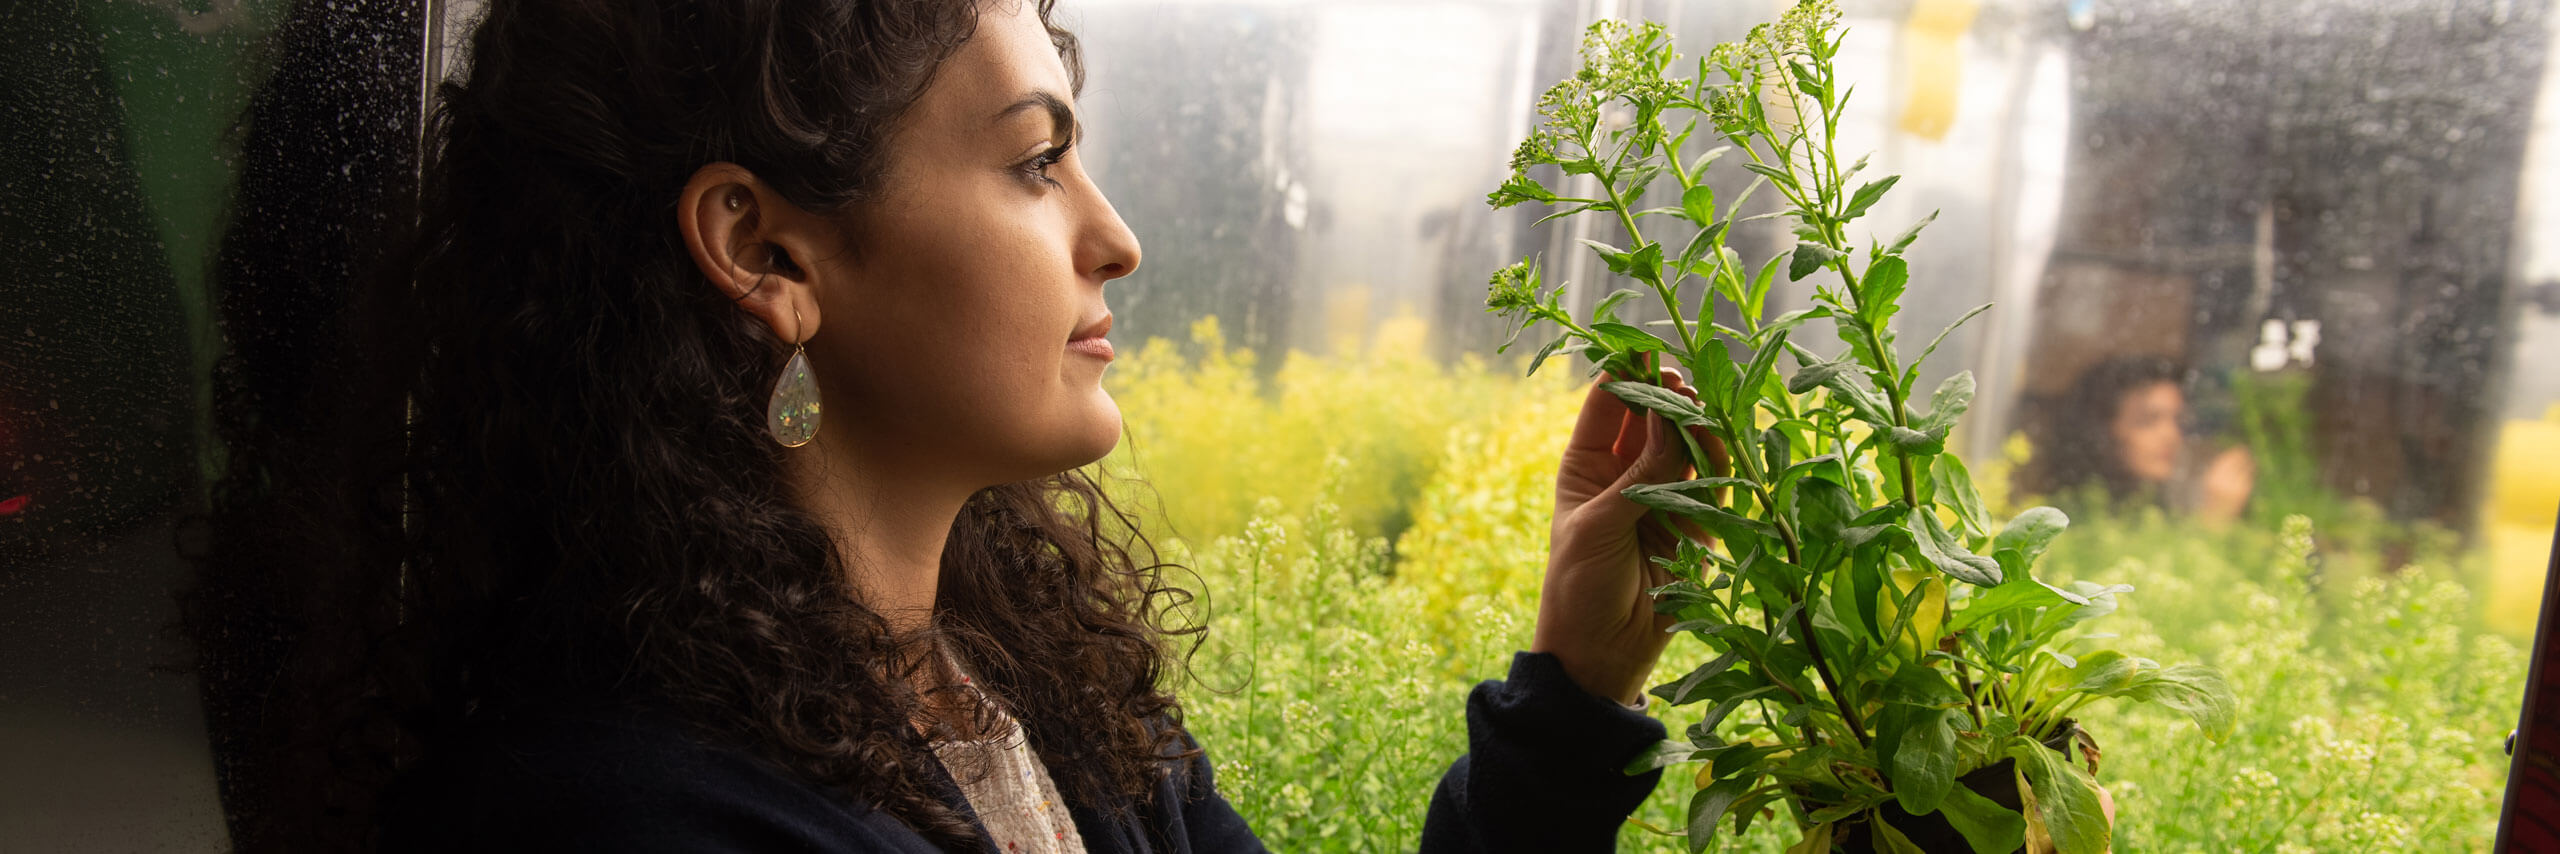 Researcher inspects the buds of a plant she is holding.